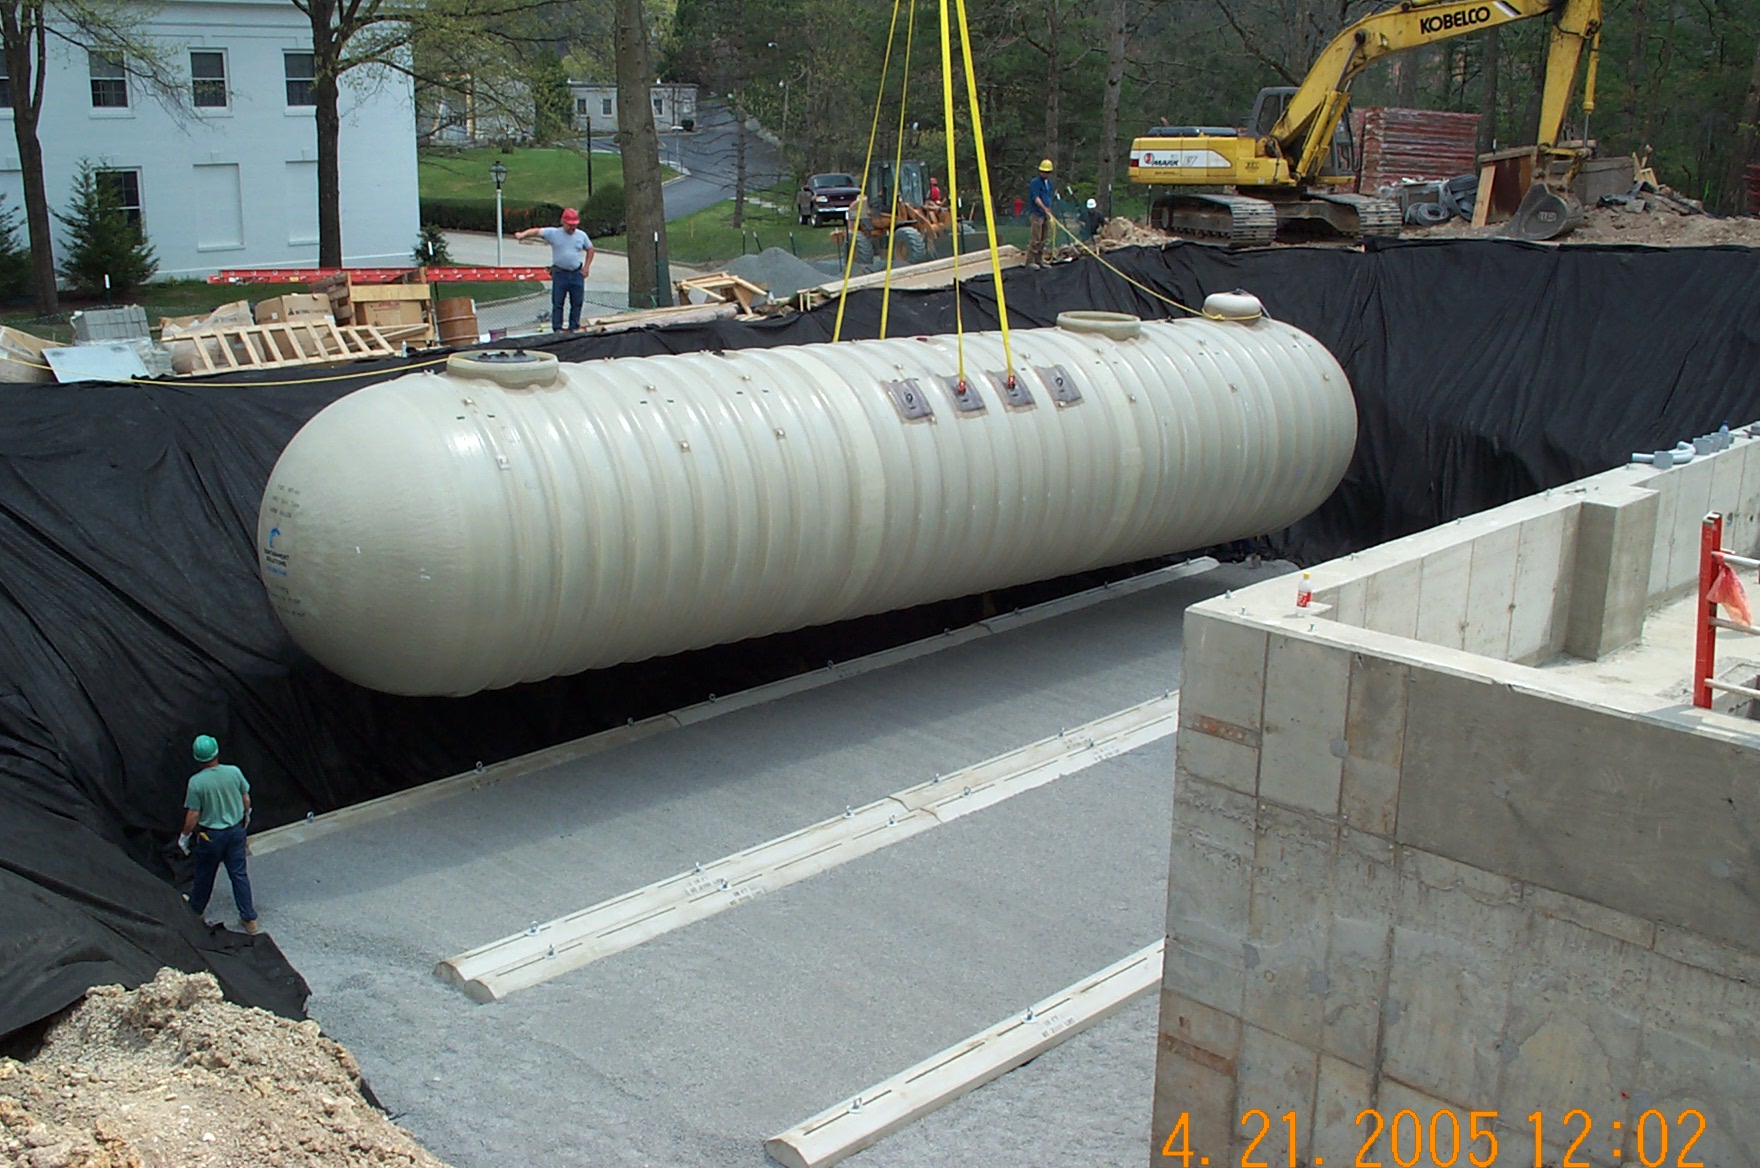 Underground Storage Tank being lifted into position during installation.